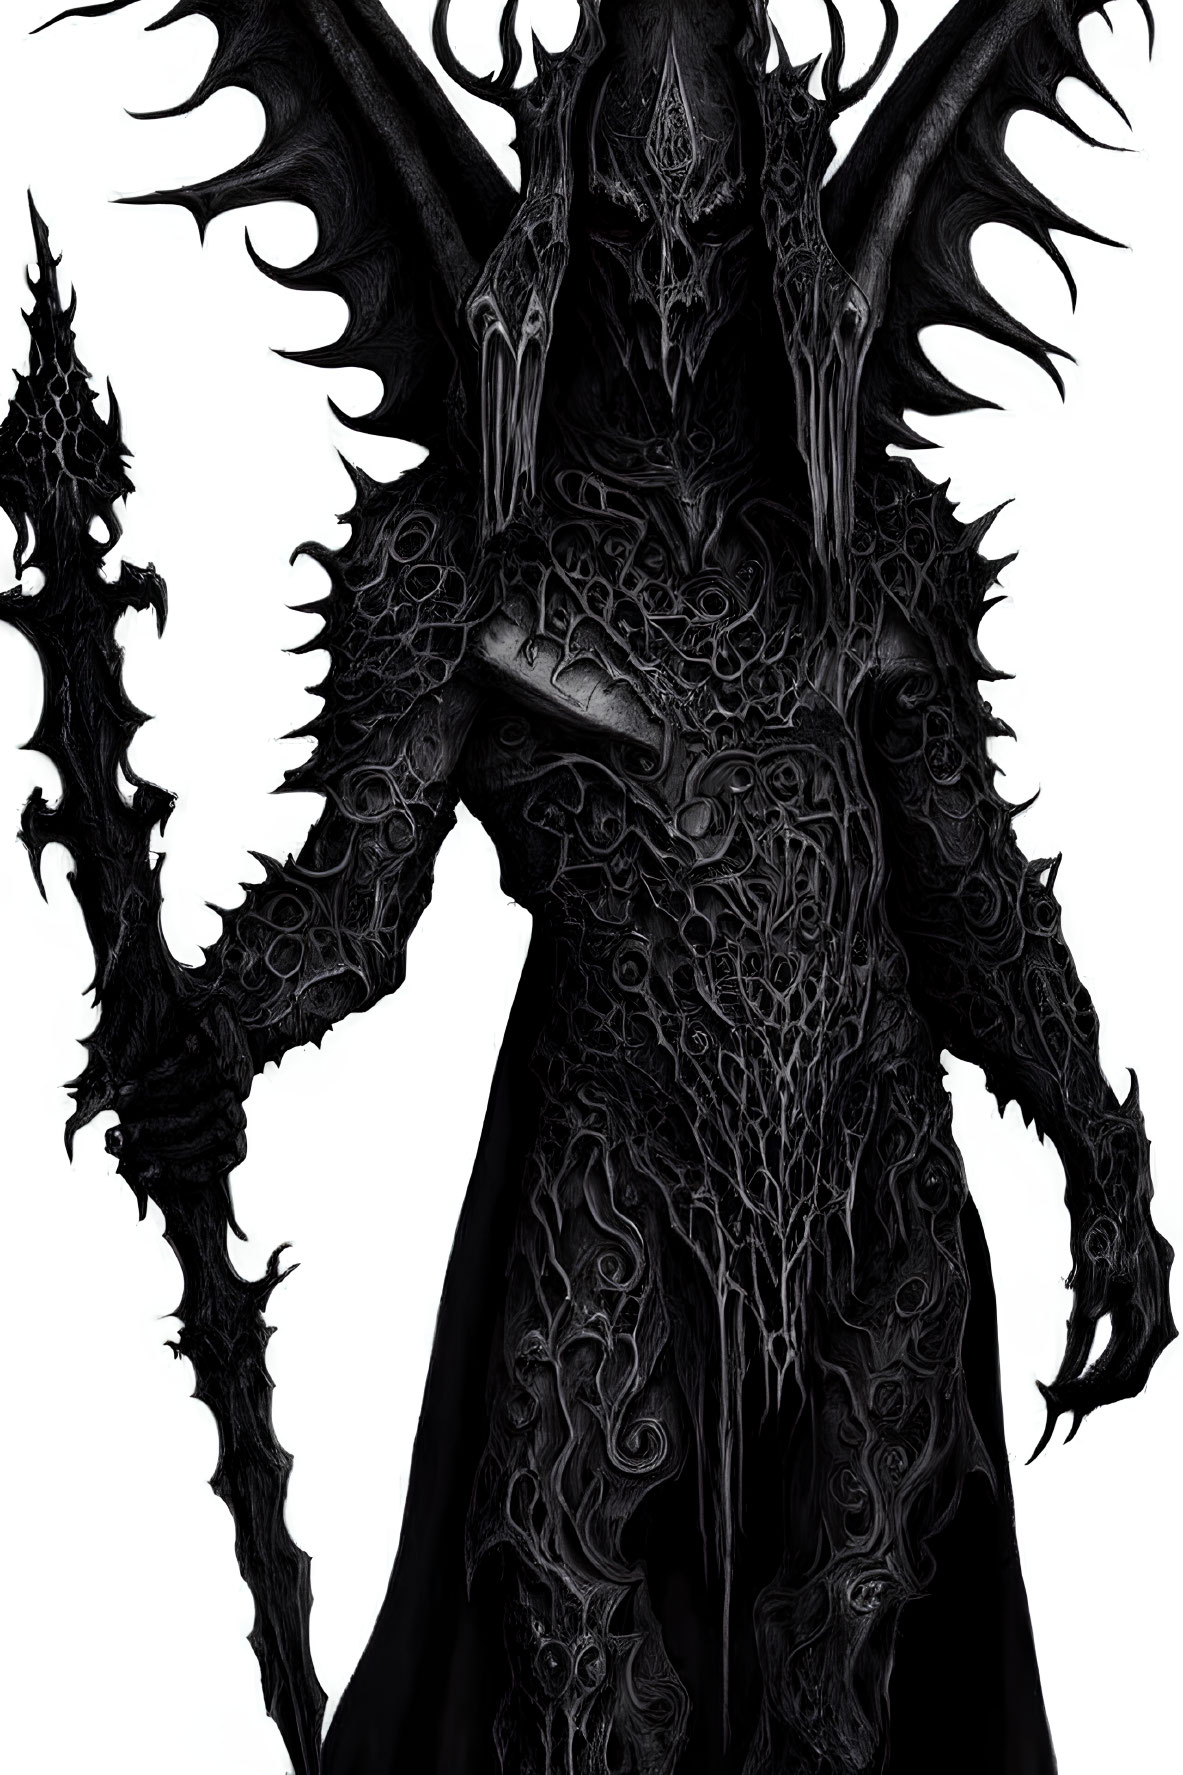 Sinister fantasy figure in dark armor with spiked shoulders and barbed staff